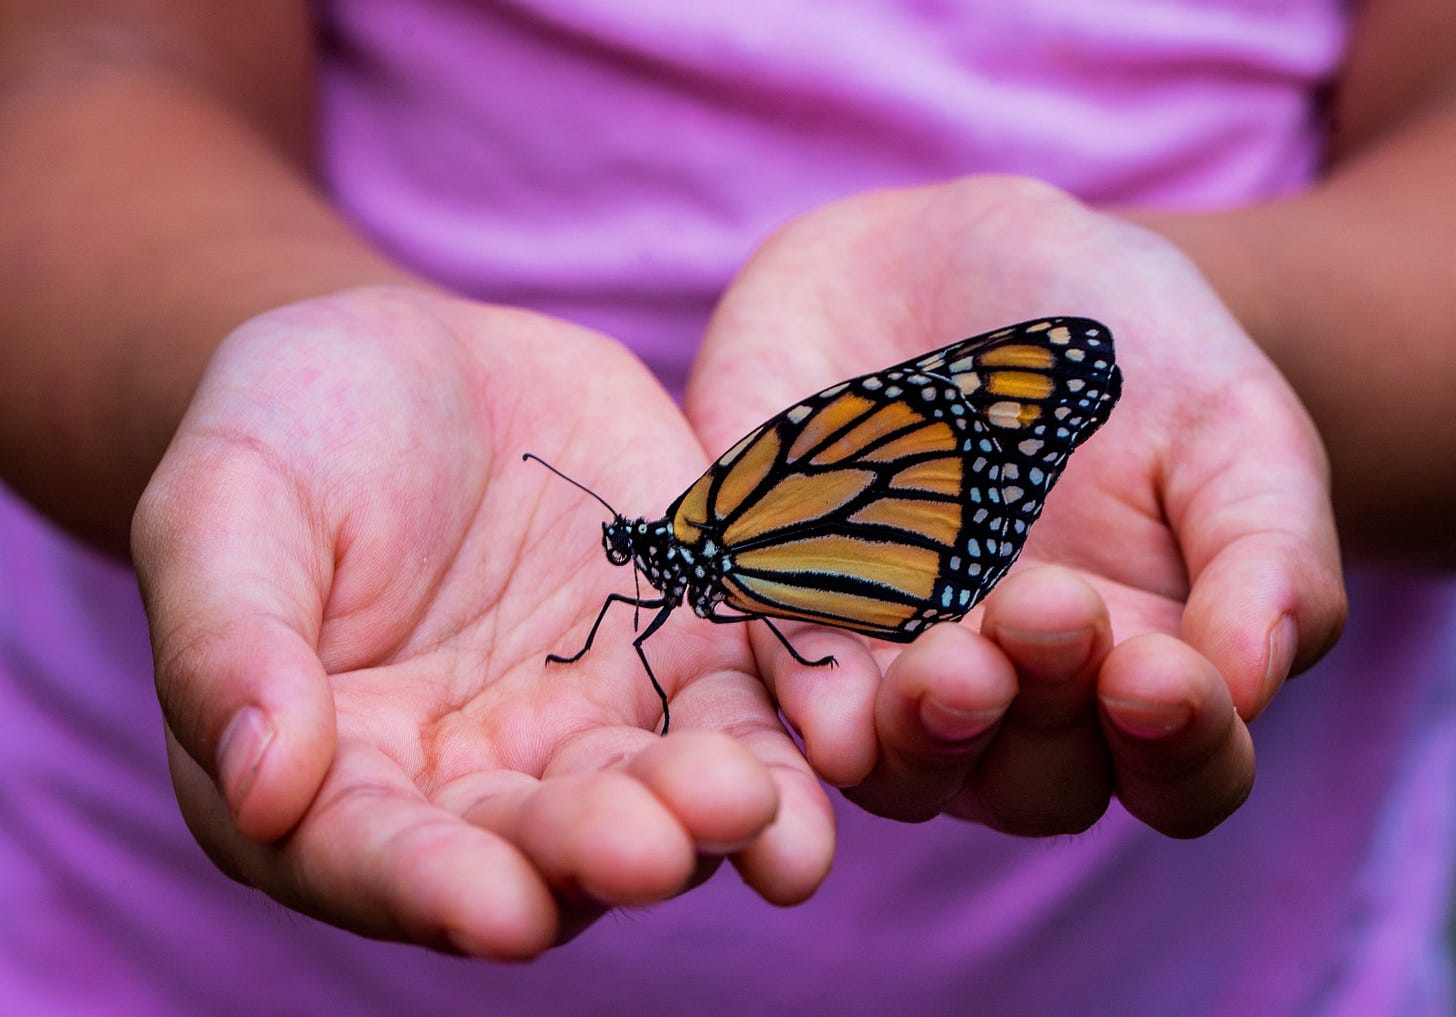 This child was delighted when a butterfly landed in her hands.